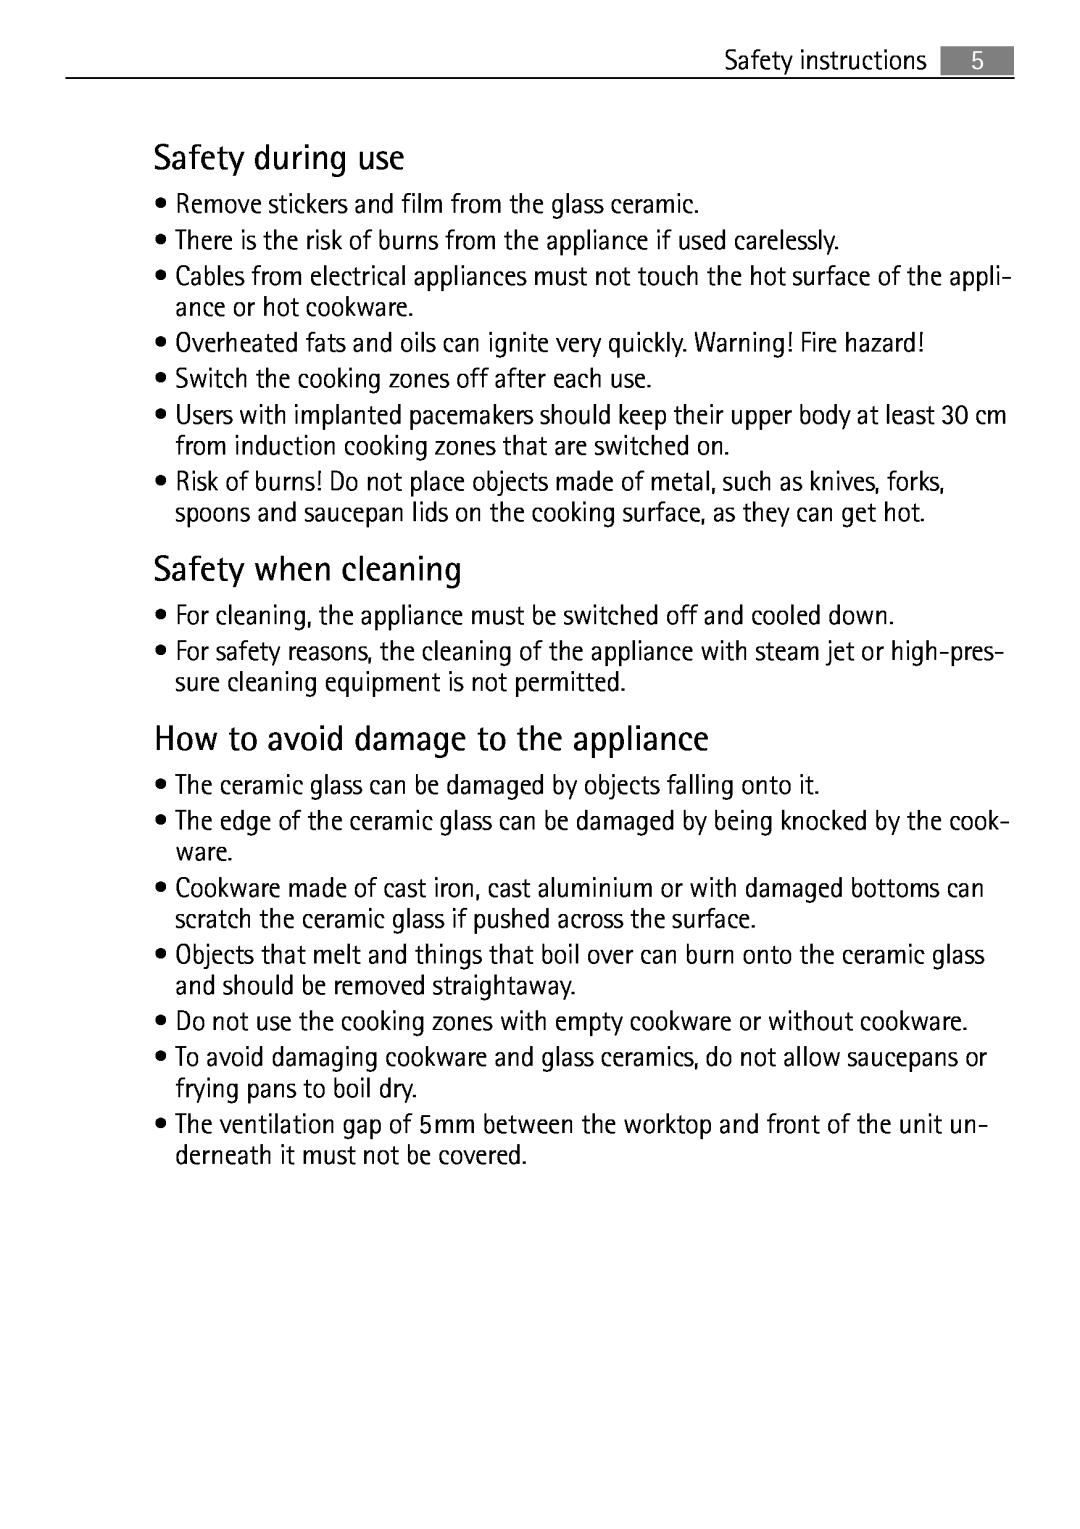 Electrolux 98001 KF SN user manual Safety during use, Safety when cleaning, How to avoid damage to the appliance 